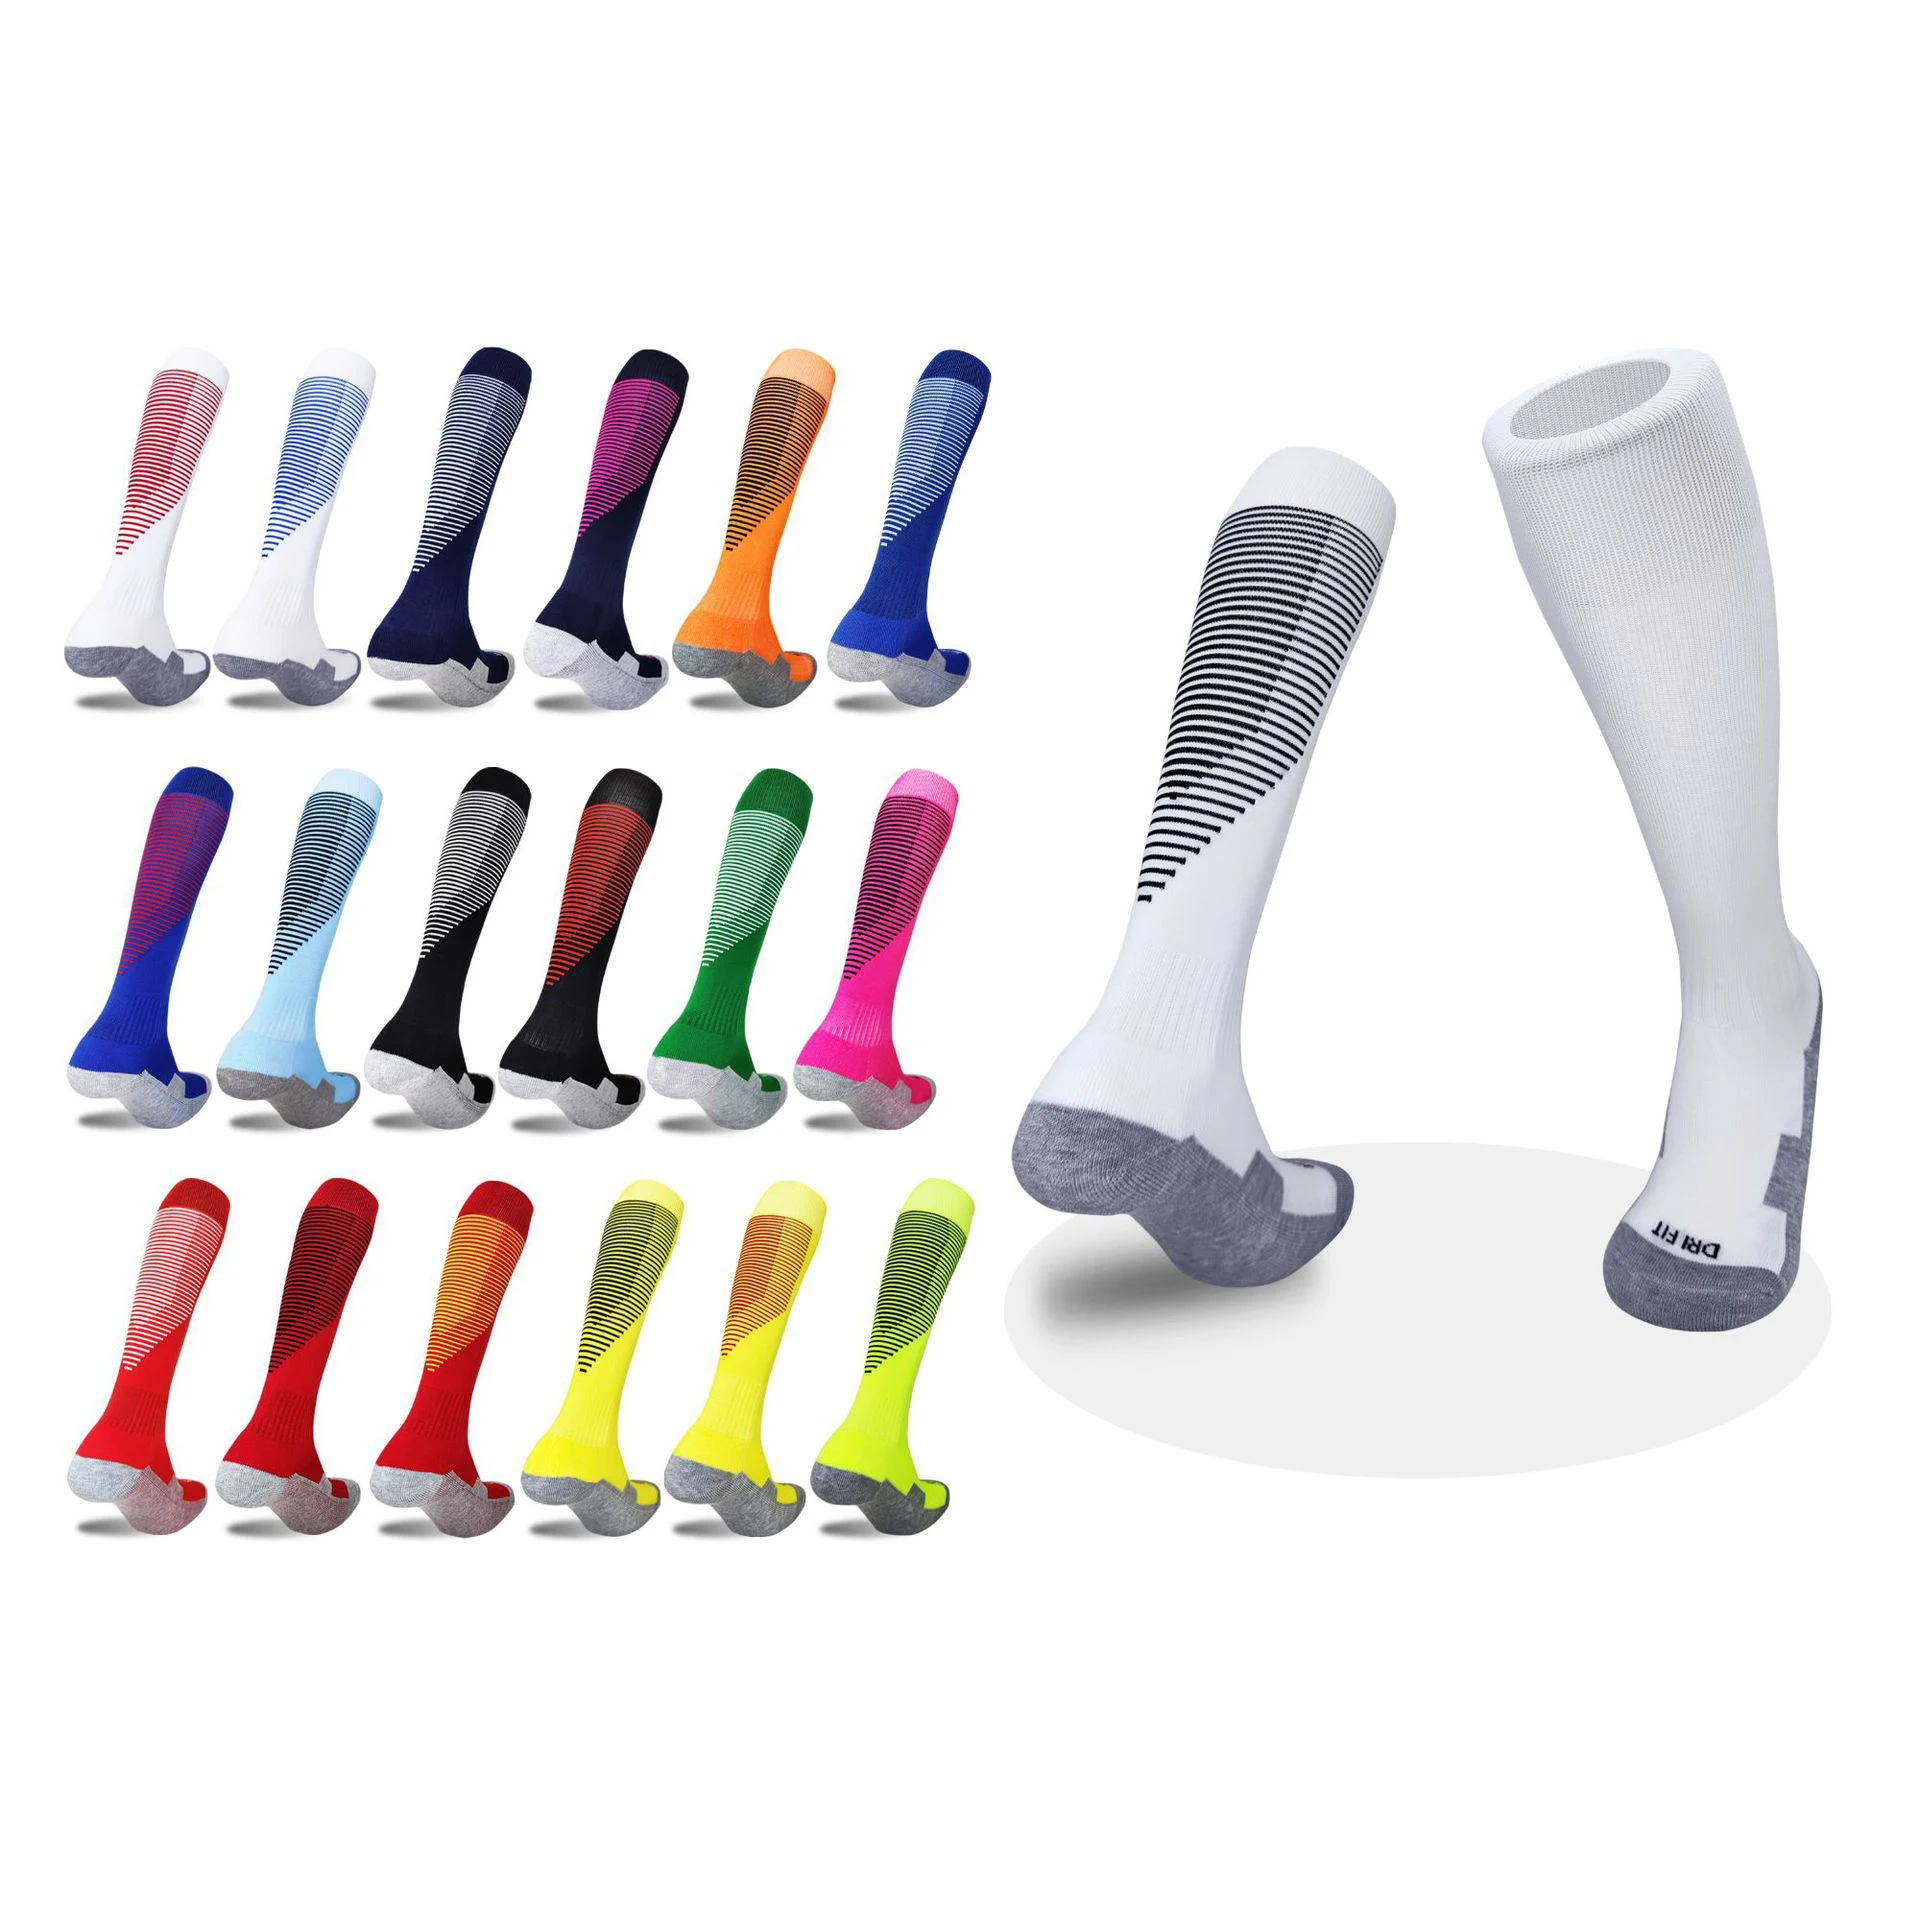 

Professional striped long knee socks for adults children sweat absorbent and breathable sports socks training football socks